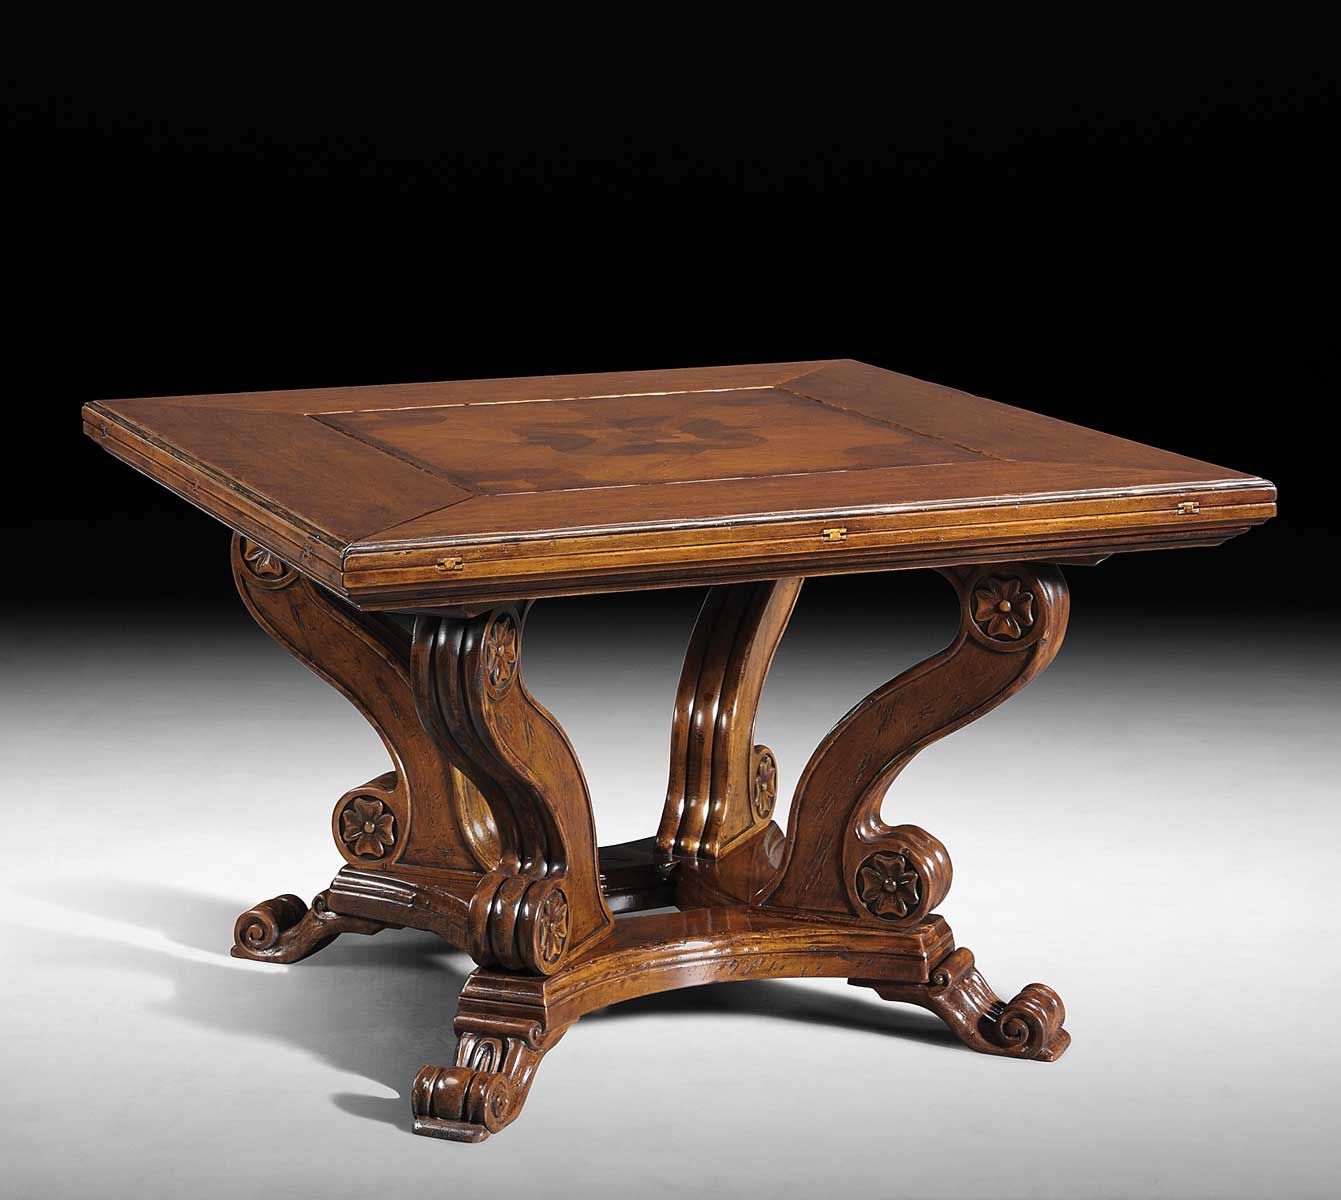 Gv 833 Folding Square To Octagonal Table – David Michael In Octagon Console Tables (Photo 3 of 20)